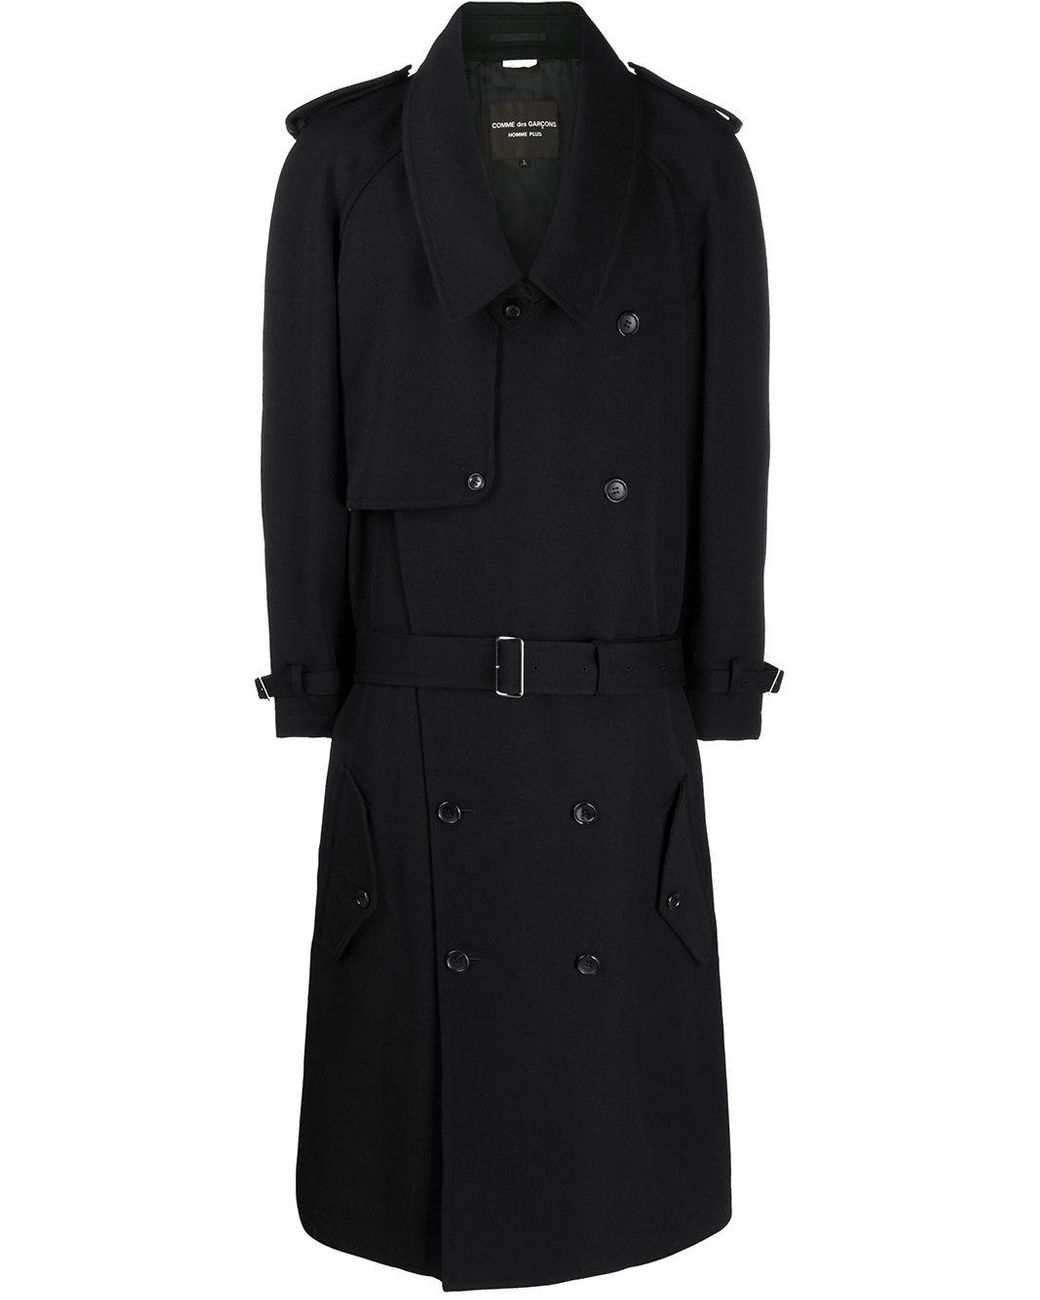 Comme des Garçons Wool Double Breasted Trench Coat in Black for Men - Lyst